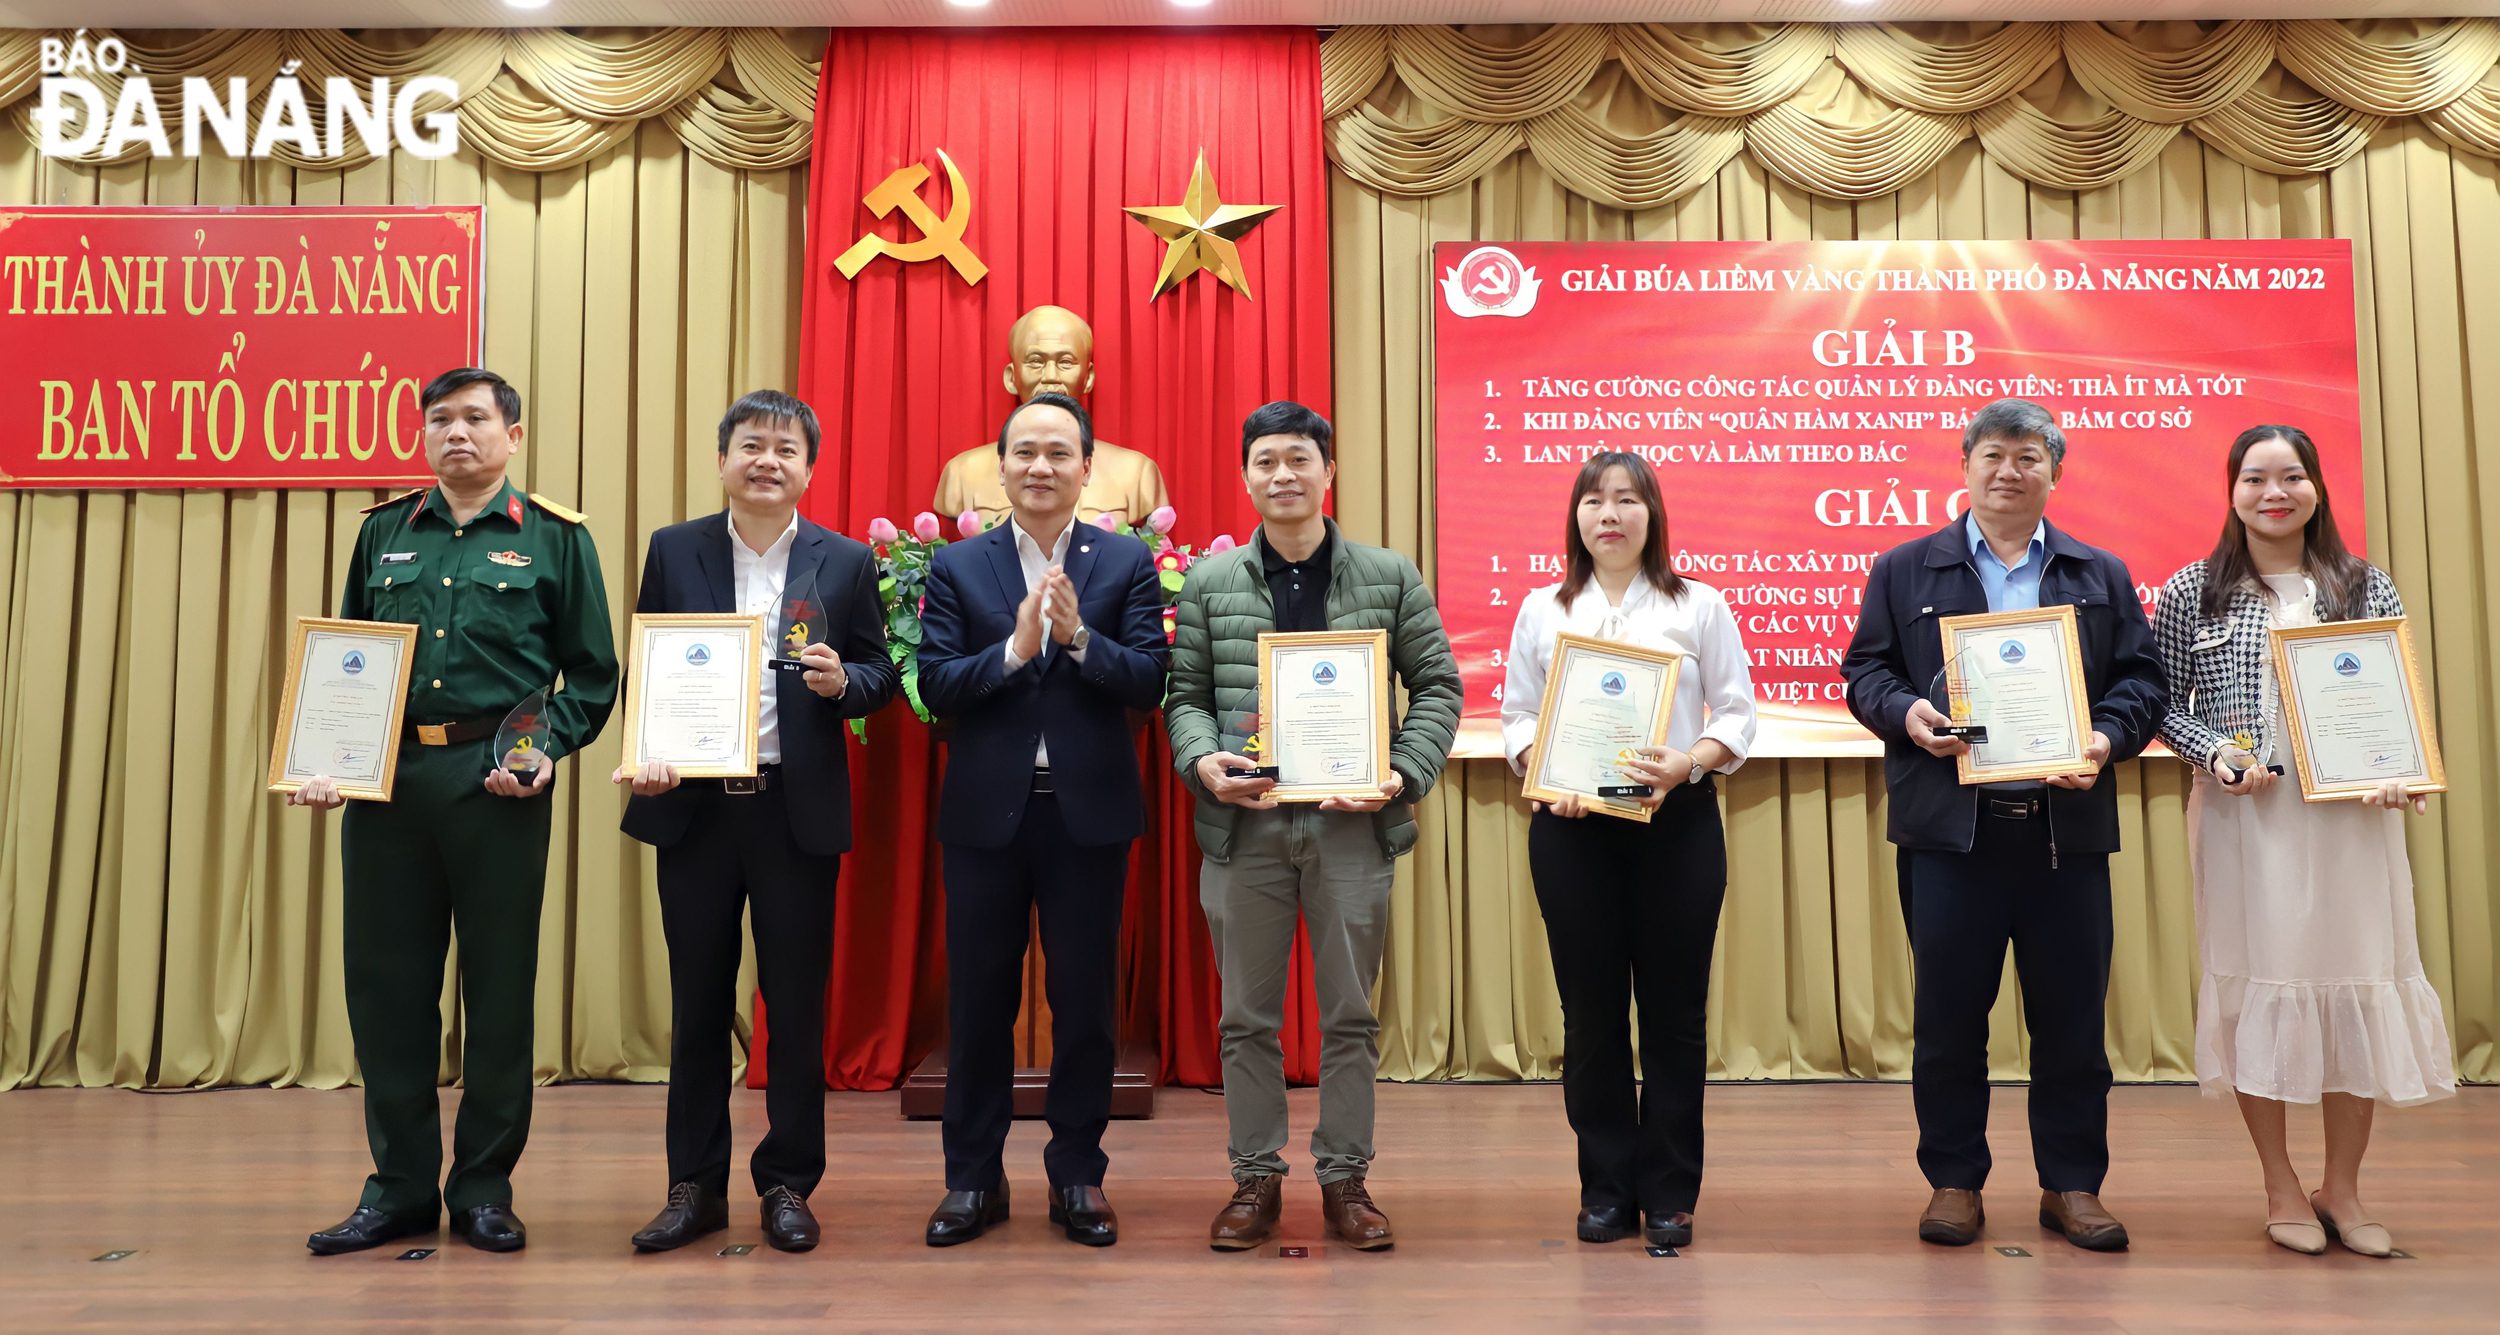 Mr Nguyen Dinh Vinh, the Head of the Organizing Board of the Da Nang Party Committee (third, left) and B and C winners. Photo X.D